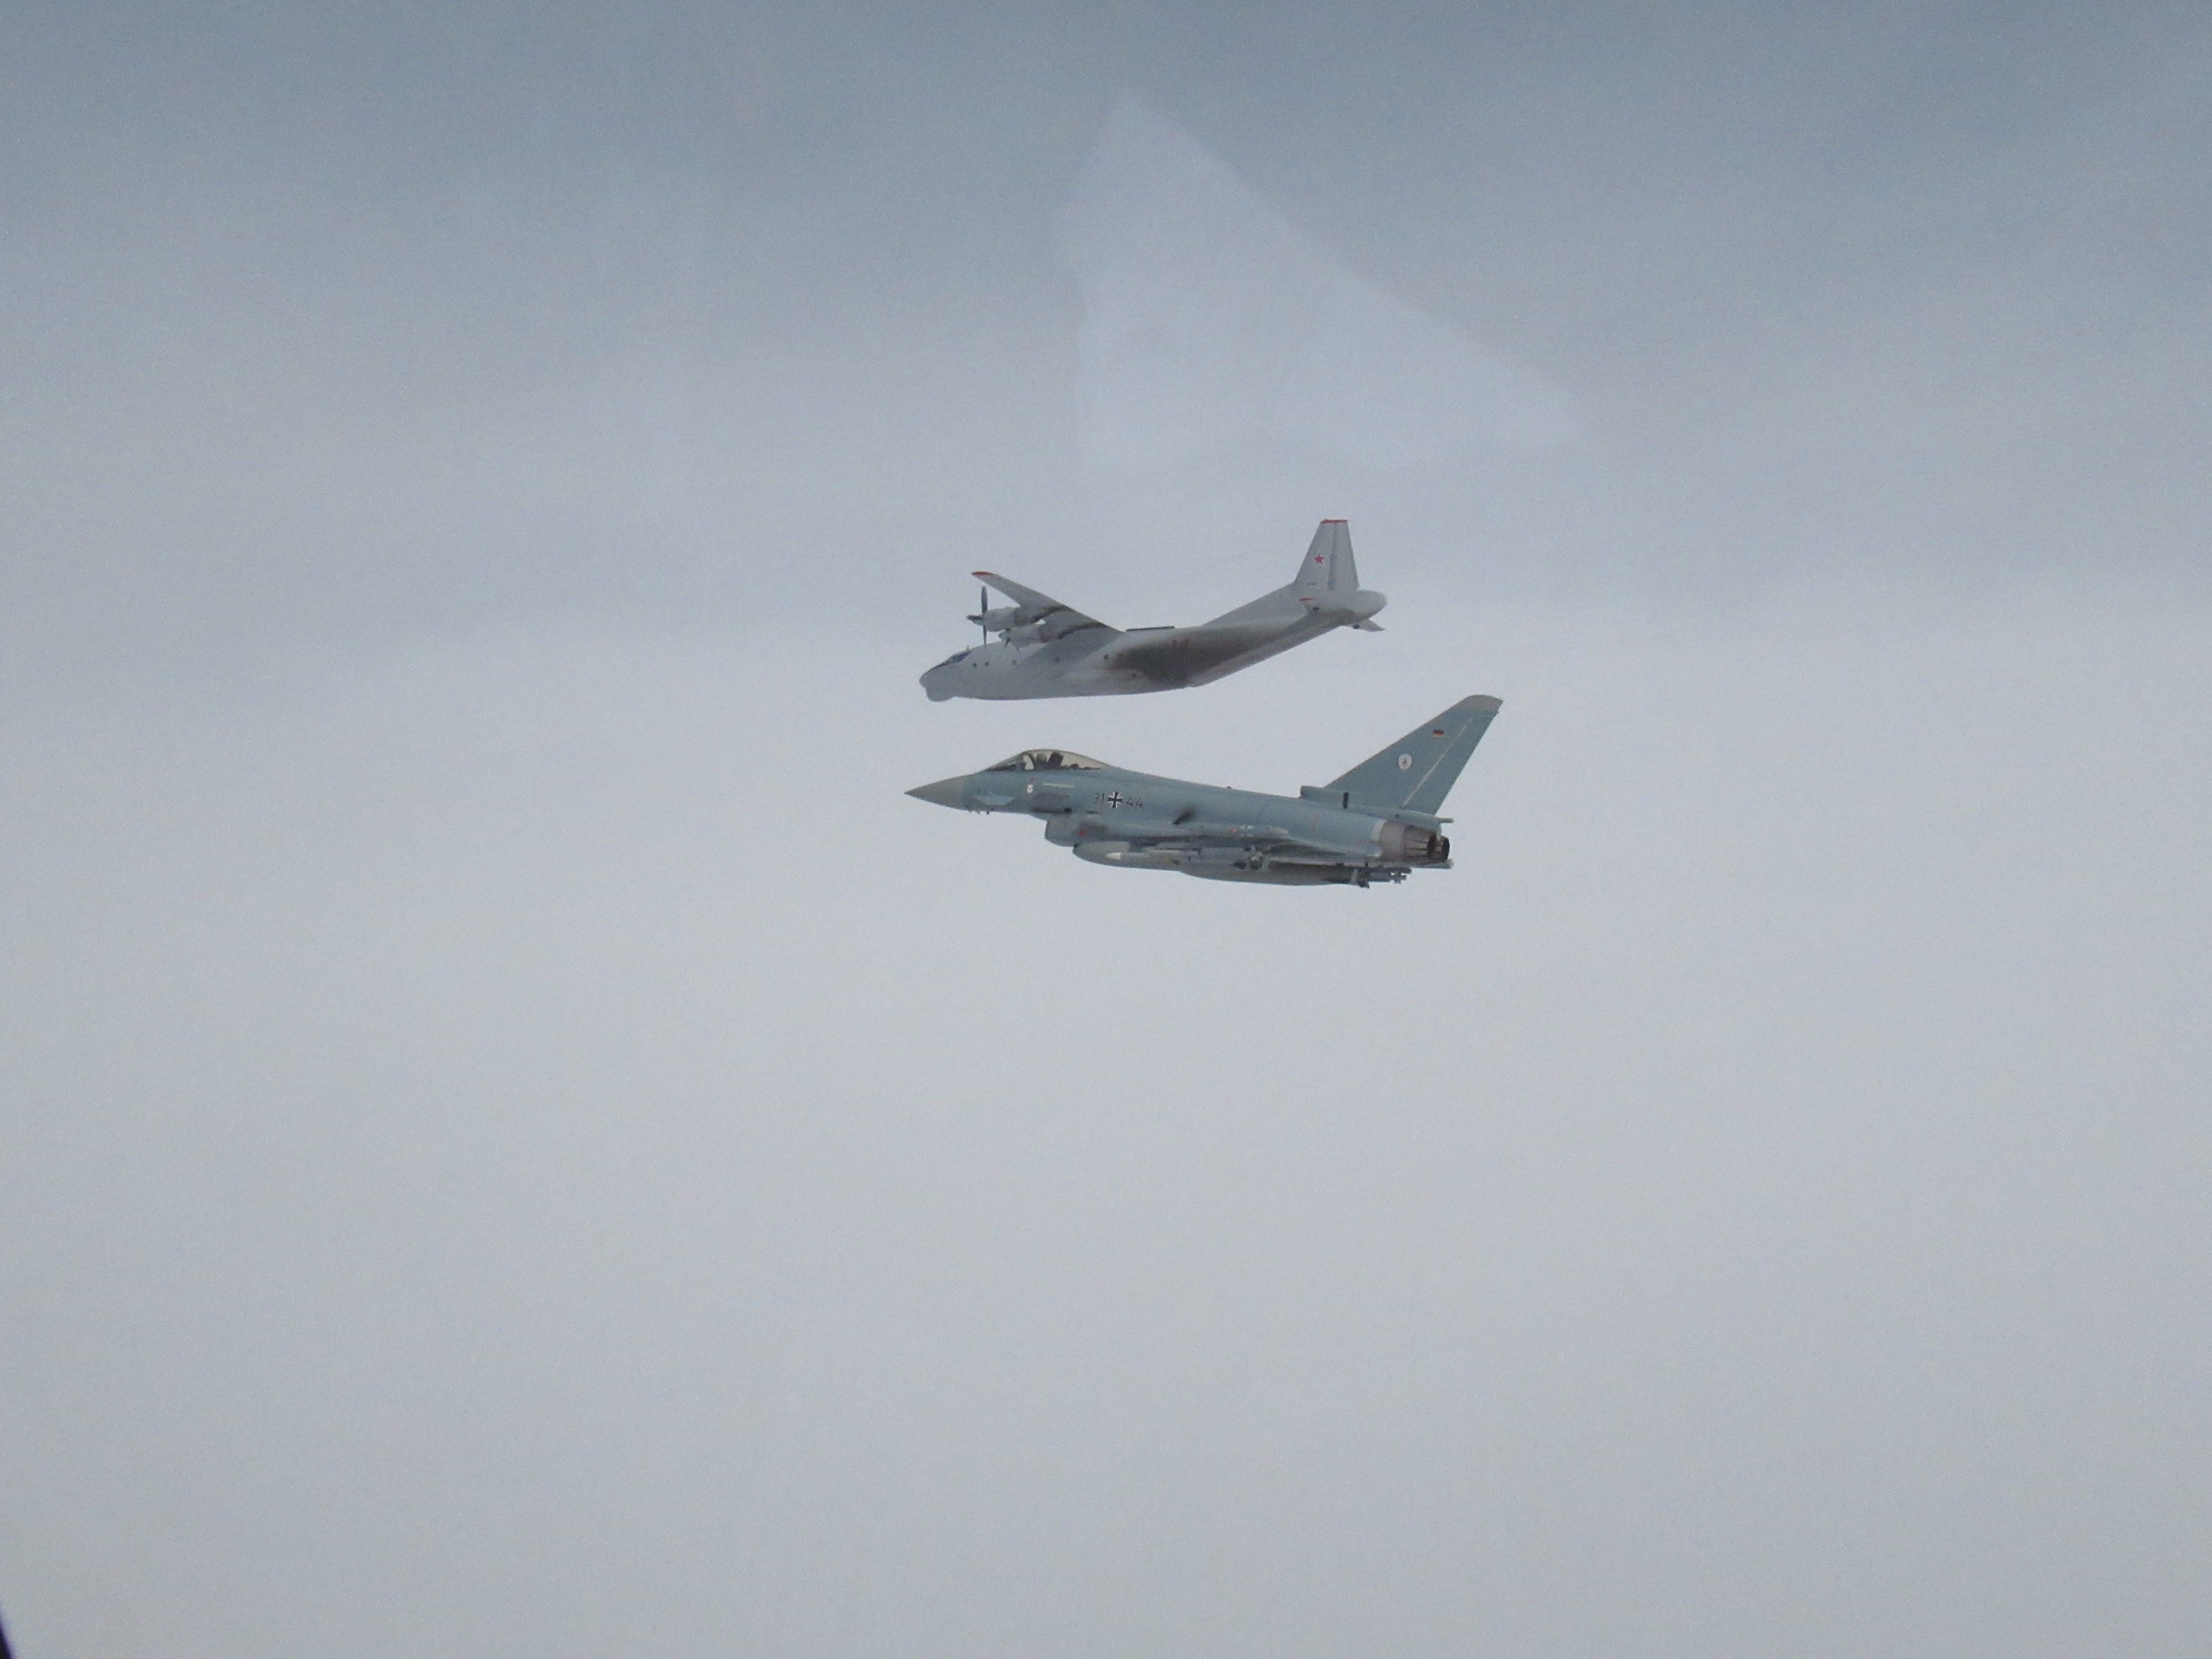 Image shows RAF boeing aircraft and Typhoon in flight.